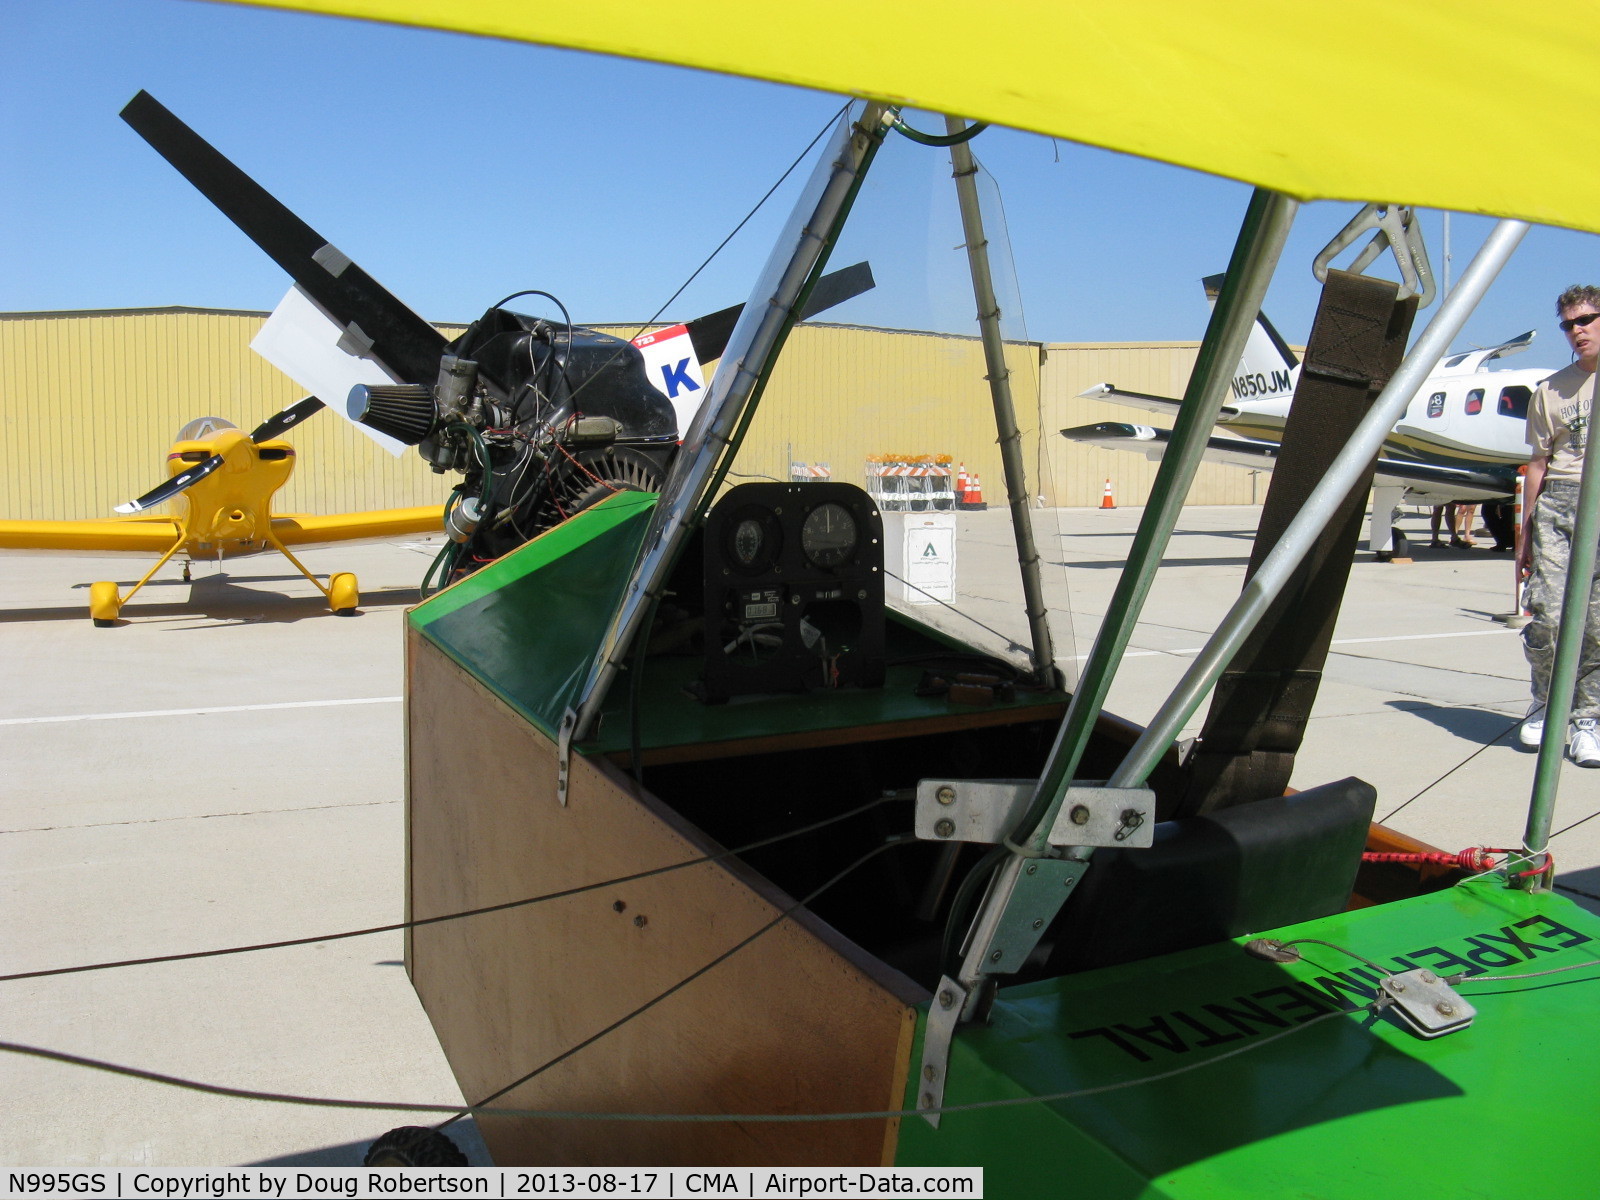 N995GS, 1999 Butterfly Aero Banty C/N 1285, 1999 Butterfly Aero BANTY Ultralight Experimental, Rotax 277 26 Hp @ 6,250 rpm single cylinder air-cooled two-stroke with integral reduction drive, single seat, panel